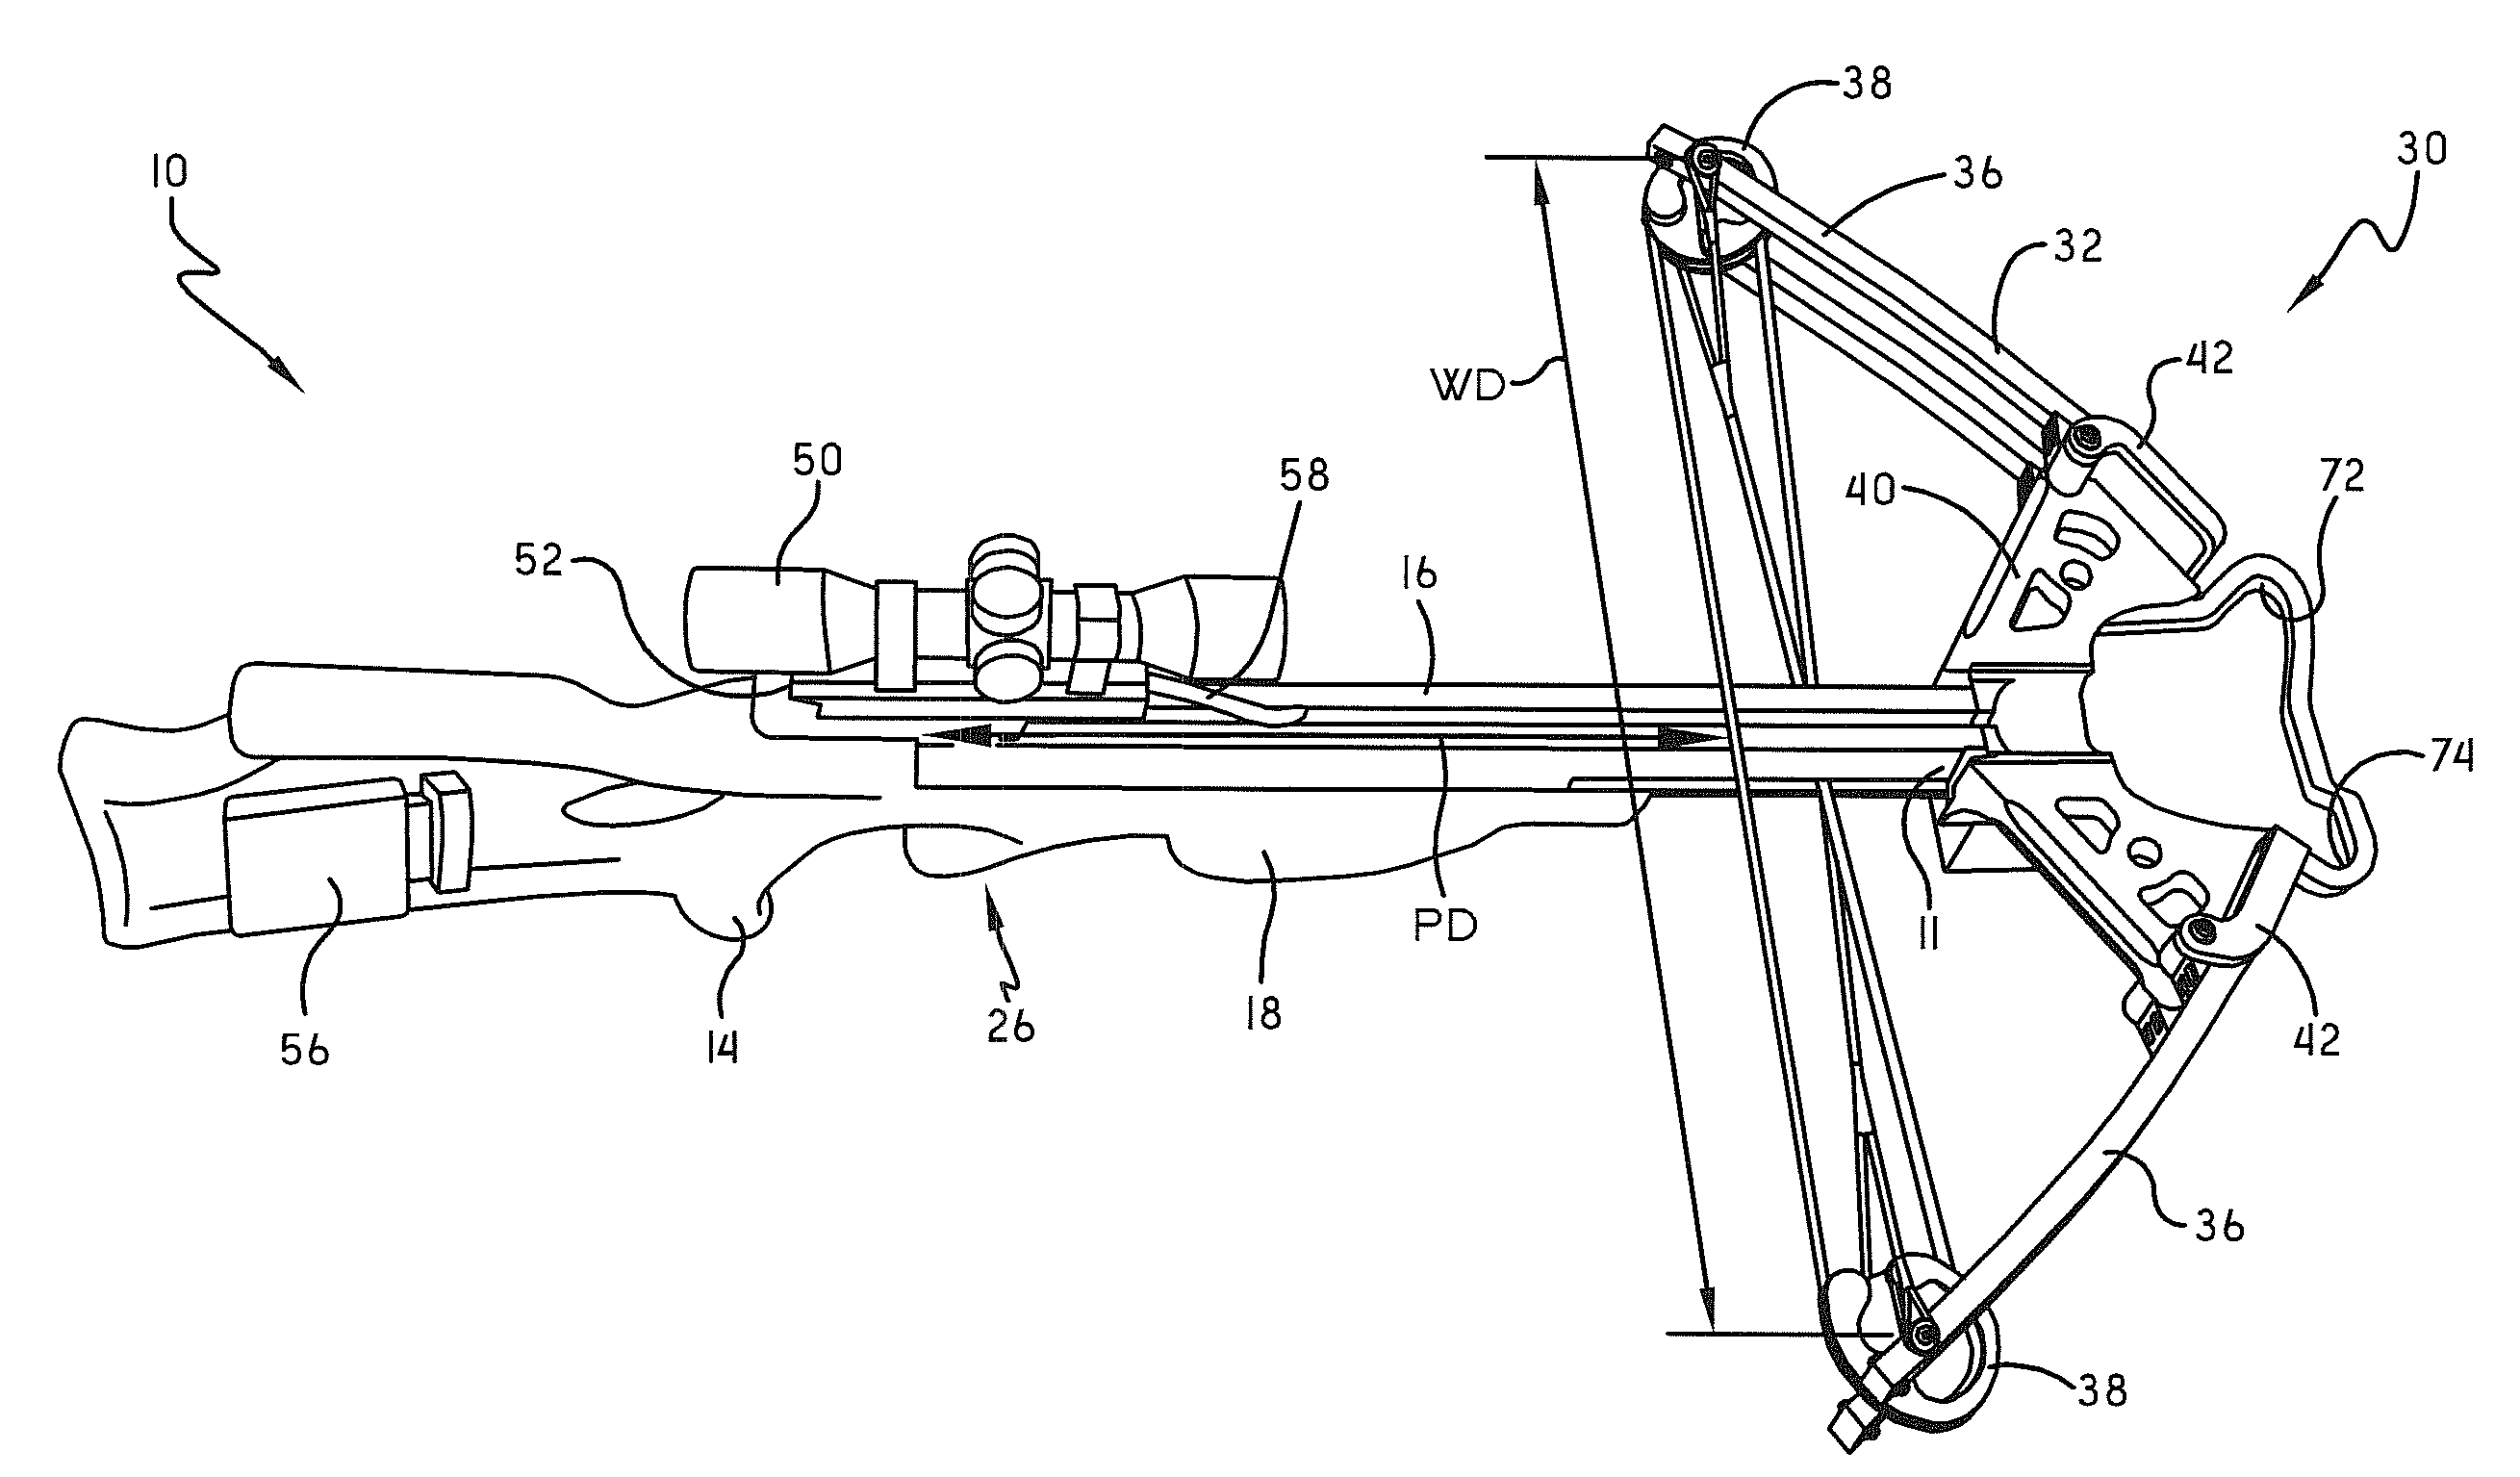 Narrow Crossbow With Large Power Stroke